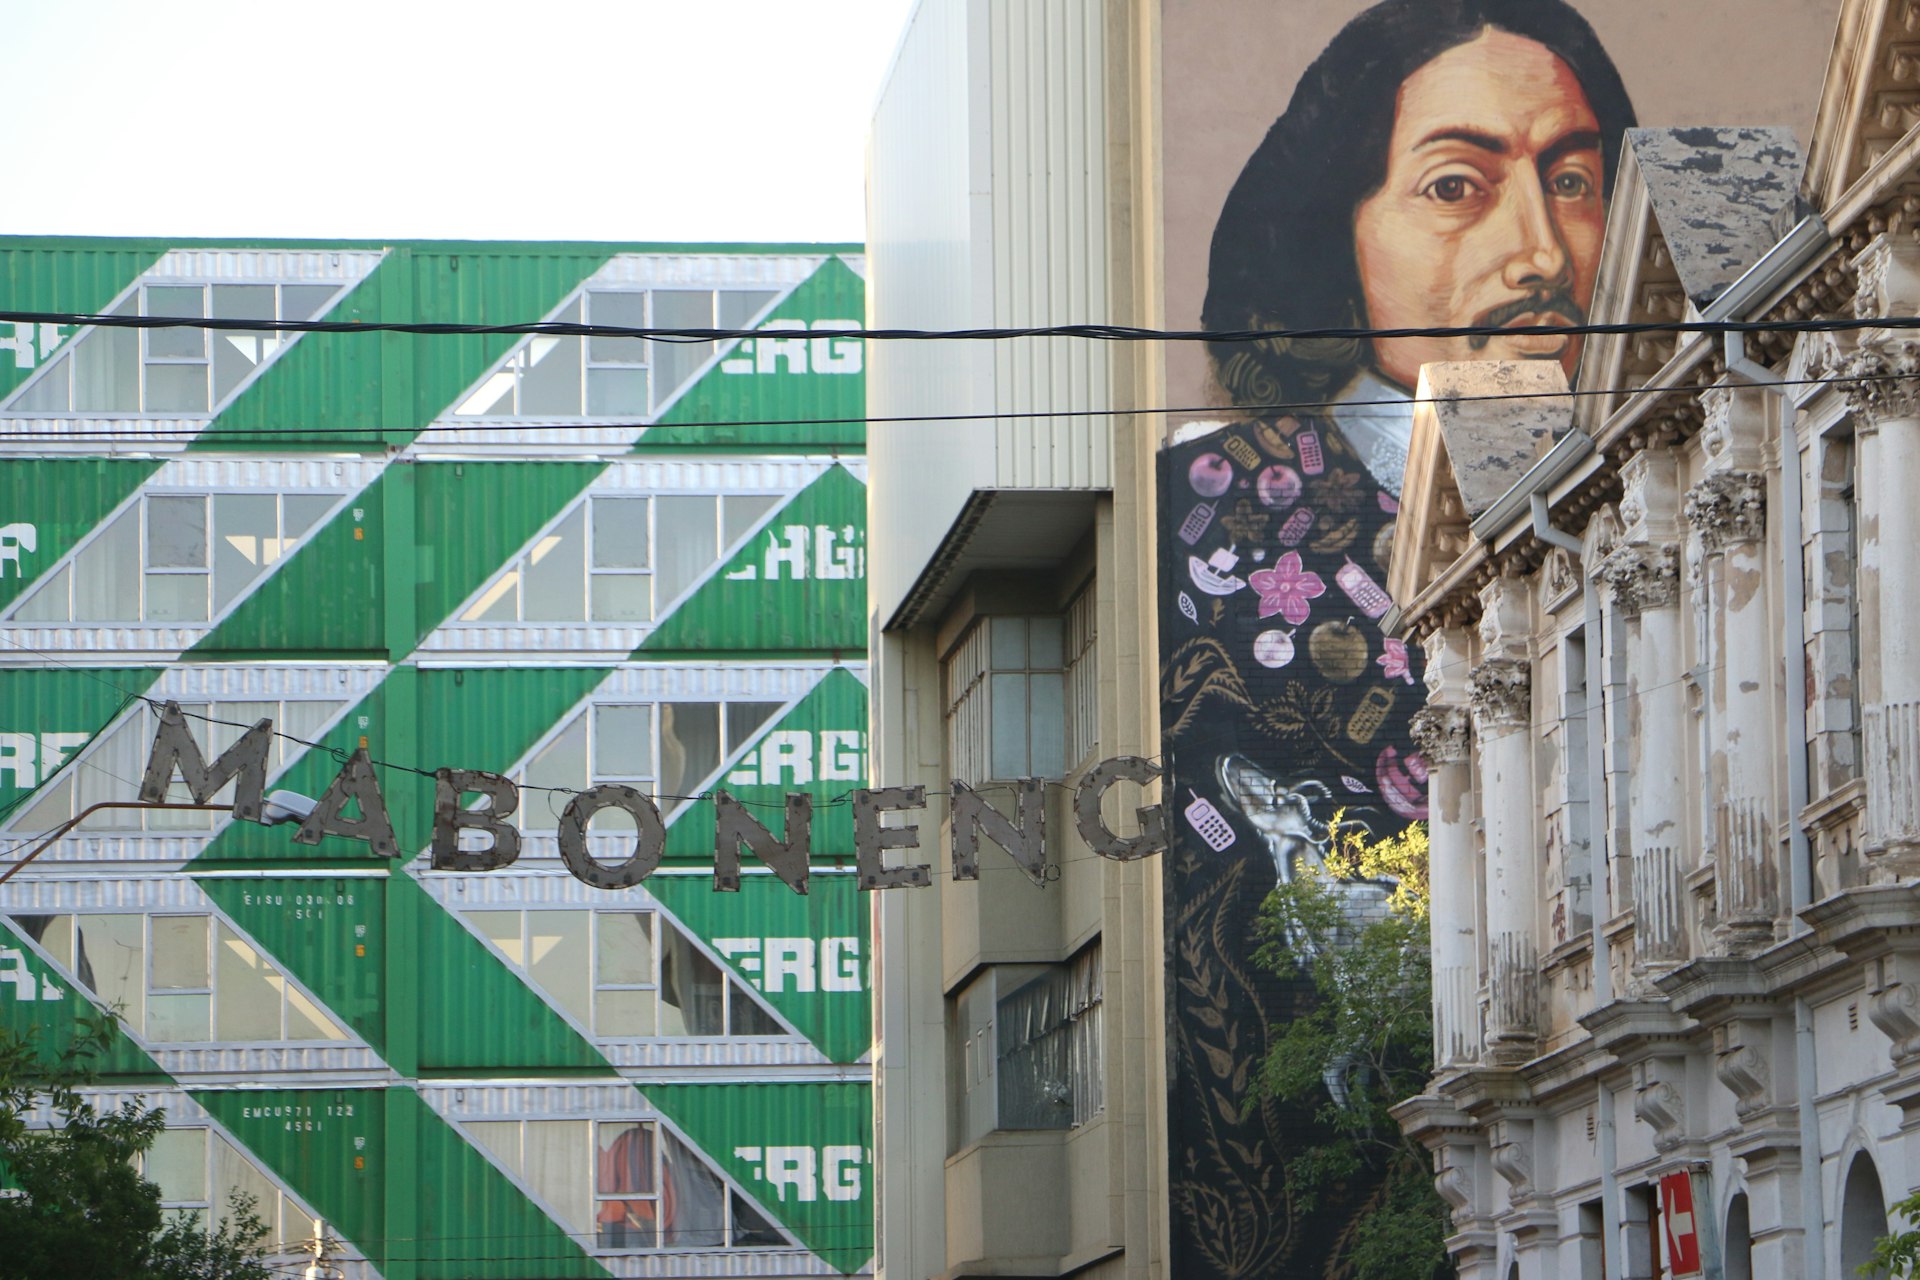 A set of metal letters spelling Maboneng hang across a street in Johannesburg. Wealthered colonial buildings stand to the right, in front of a three-storey tall mural of Jan Van Riebeeck. A tower of stacked green-and-white shipping containers, with windows cut out, stands in the background © Simon Richmond / Lonely Planet